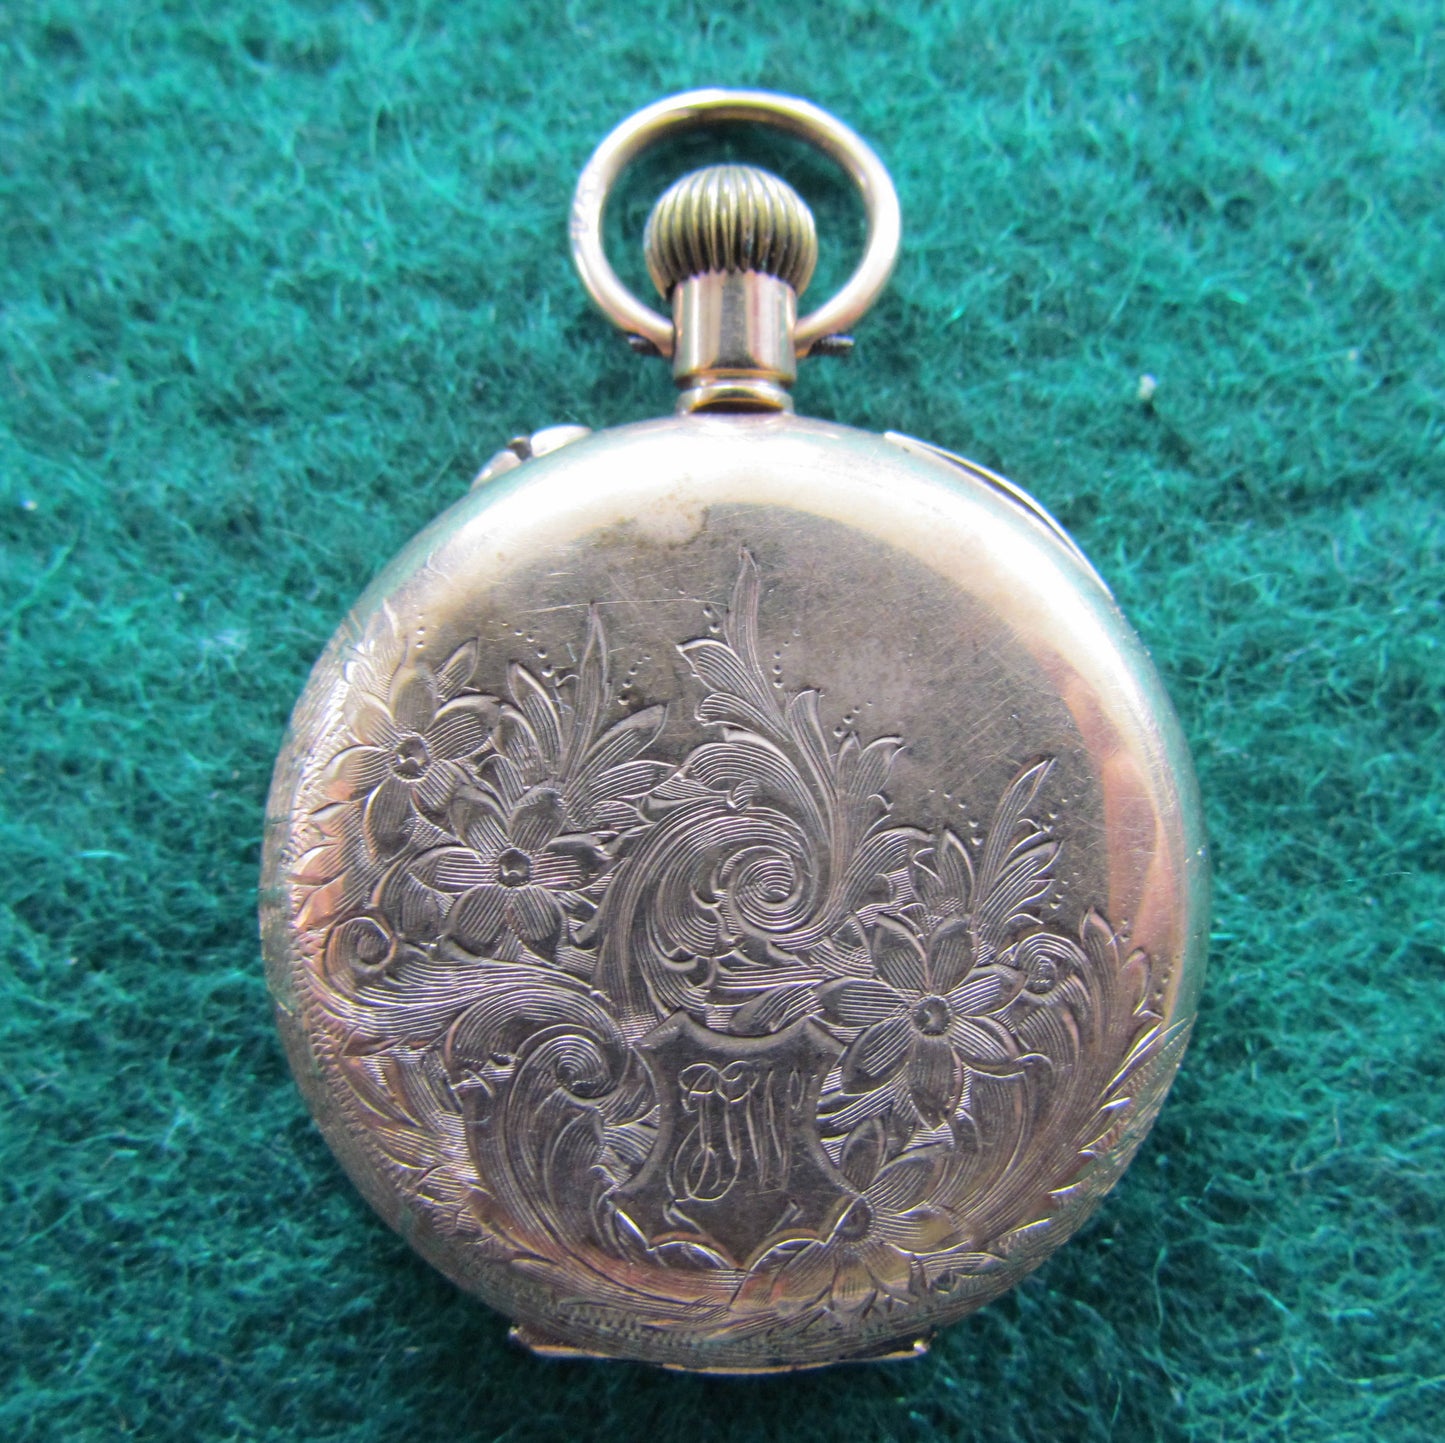 9ct Gold Unidentified Open Faceced Ladies Pocket Watch Swiss Made c1918